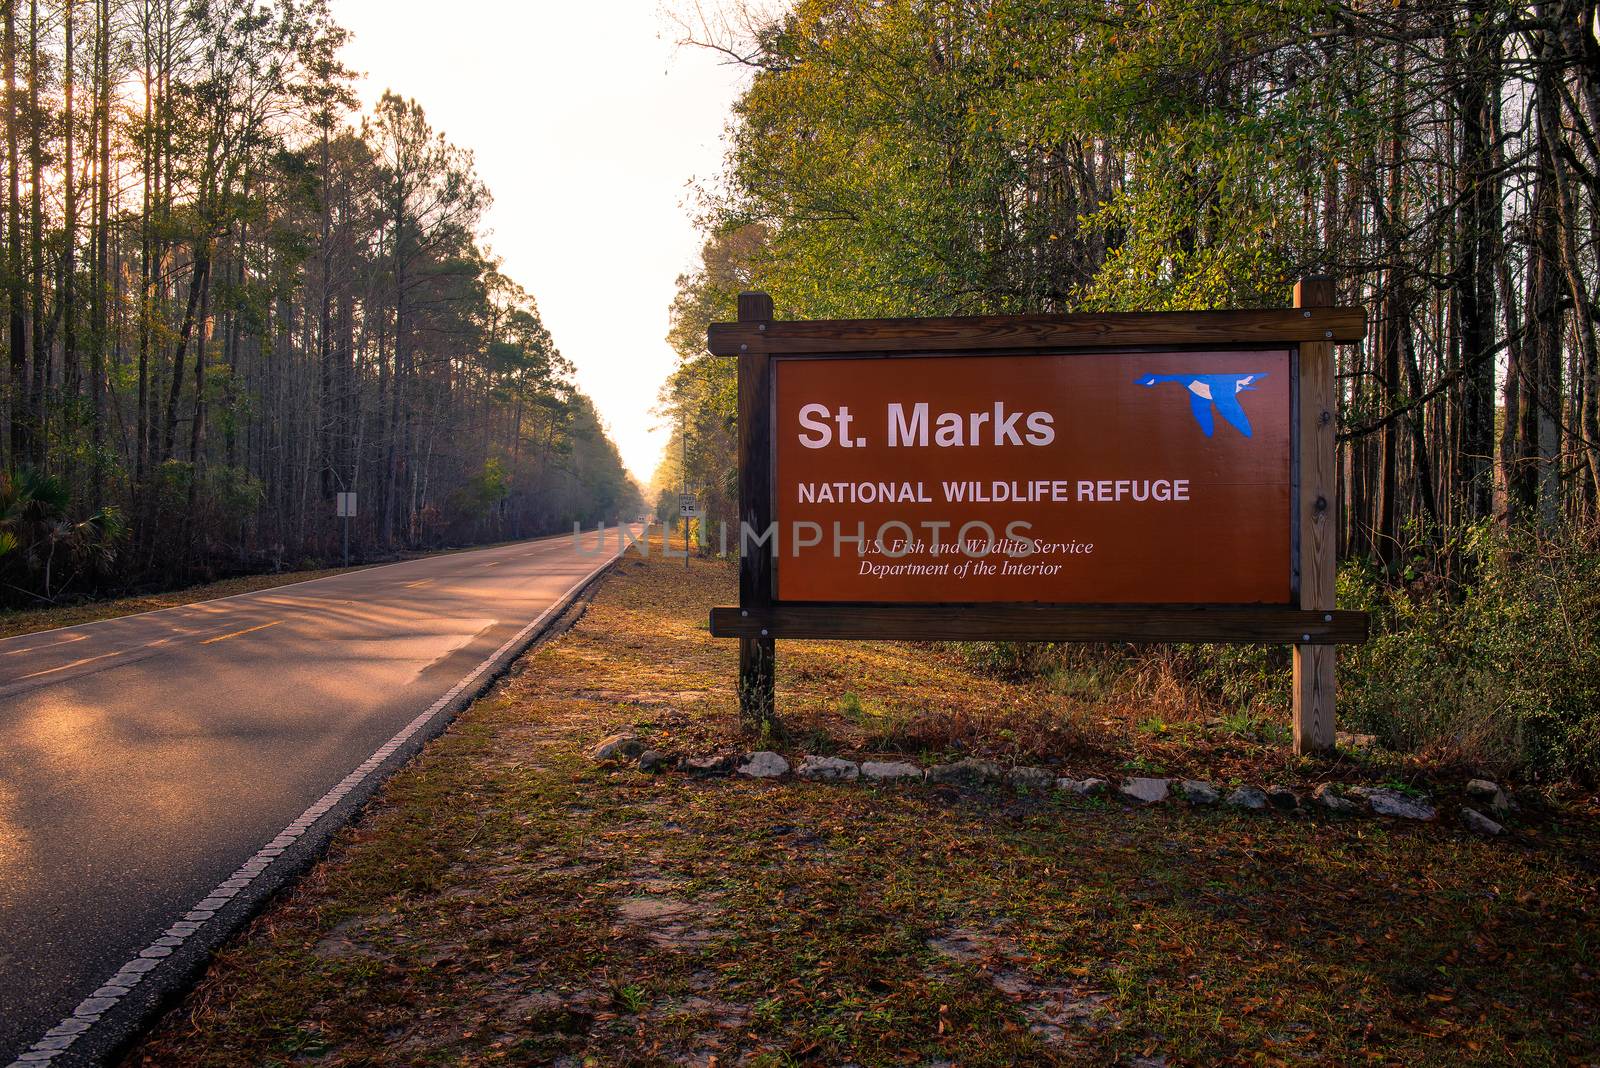 St. Marks National Wildlife Refuge entrance sign. It encompasses 68,000 acres spread between Wakulla, Jefferson, and Taylor Counties in the state of Florida.